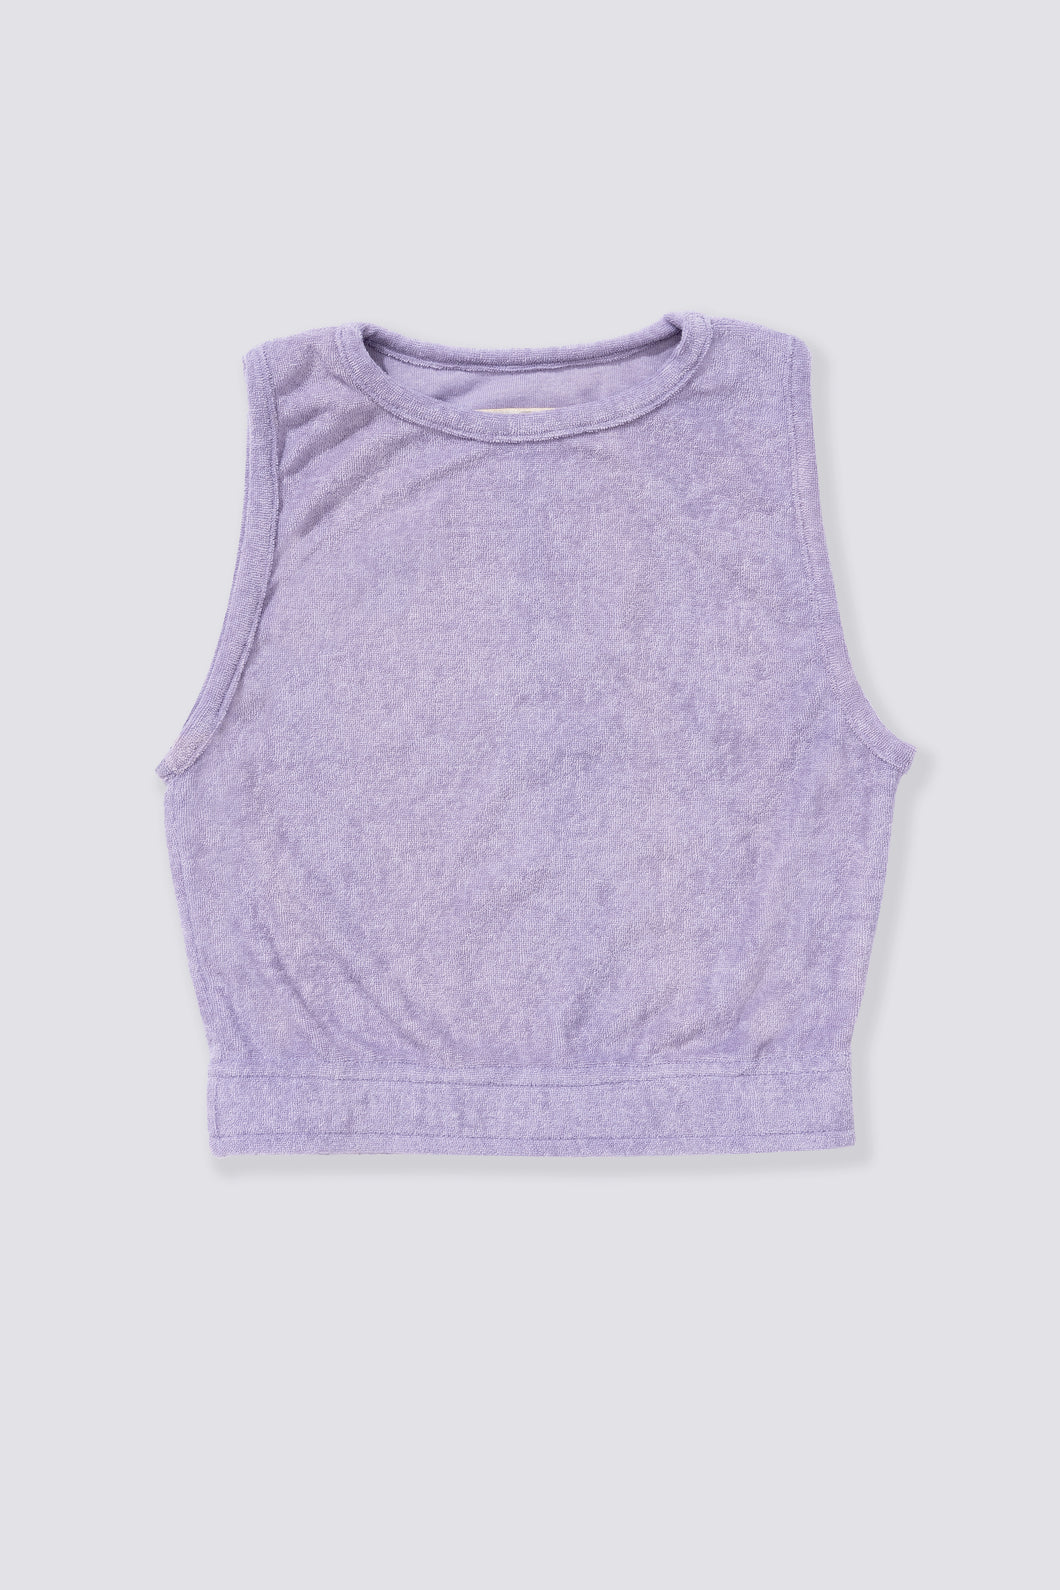 Terry Cloth Halter Top - French Lavender